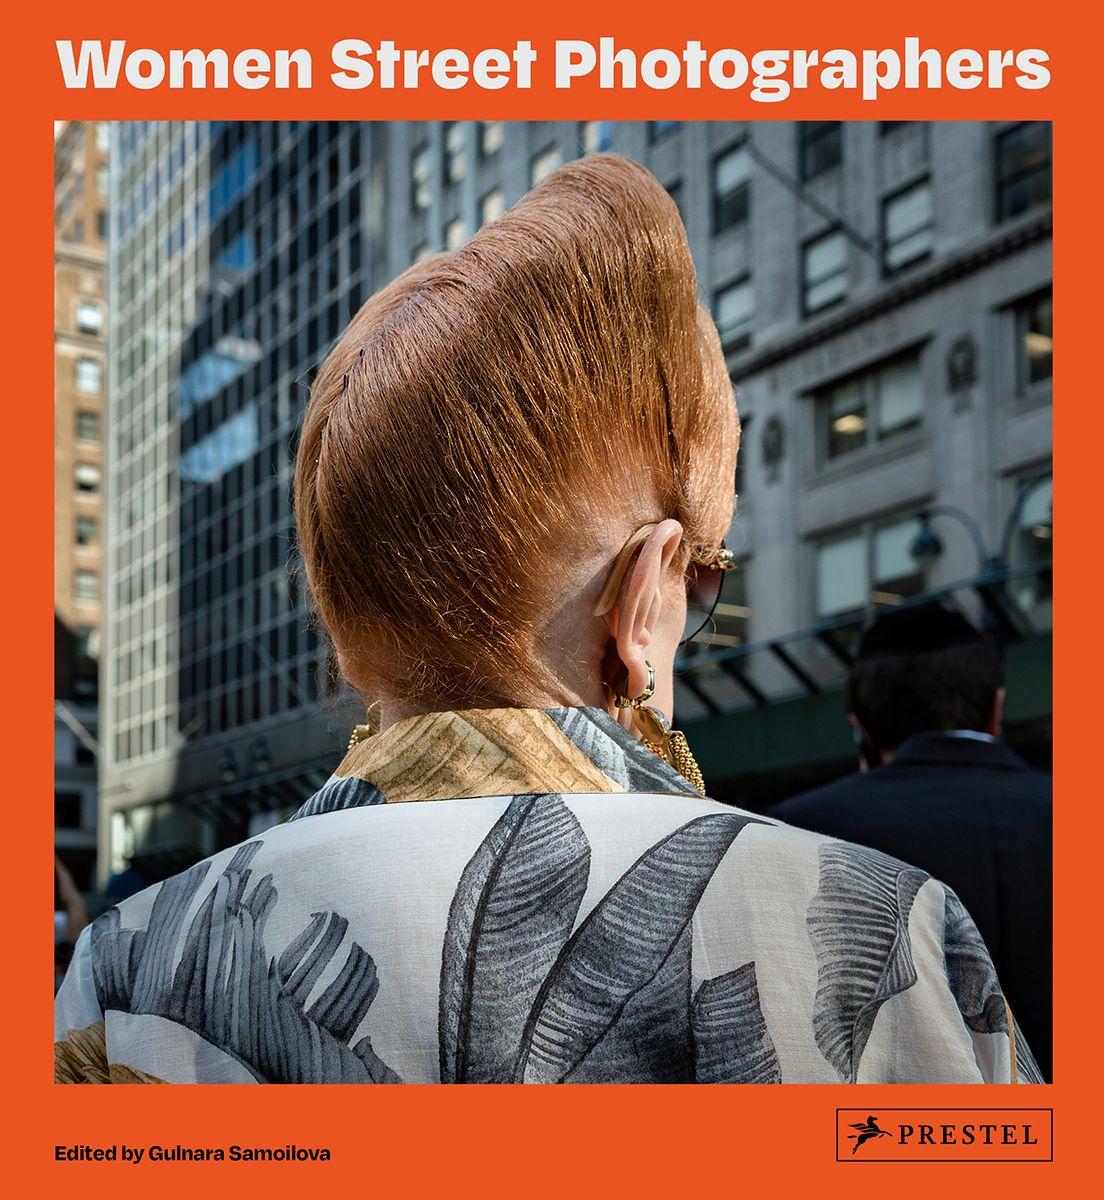 Shedding Street Photography's Male-Dominated Legacy